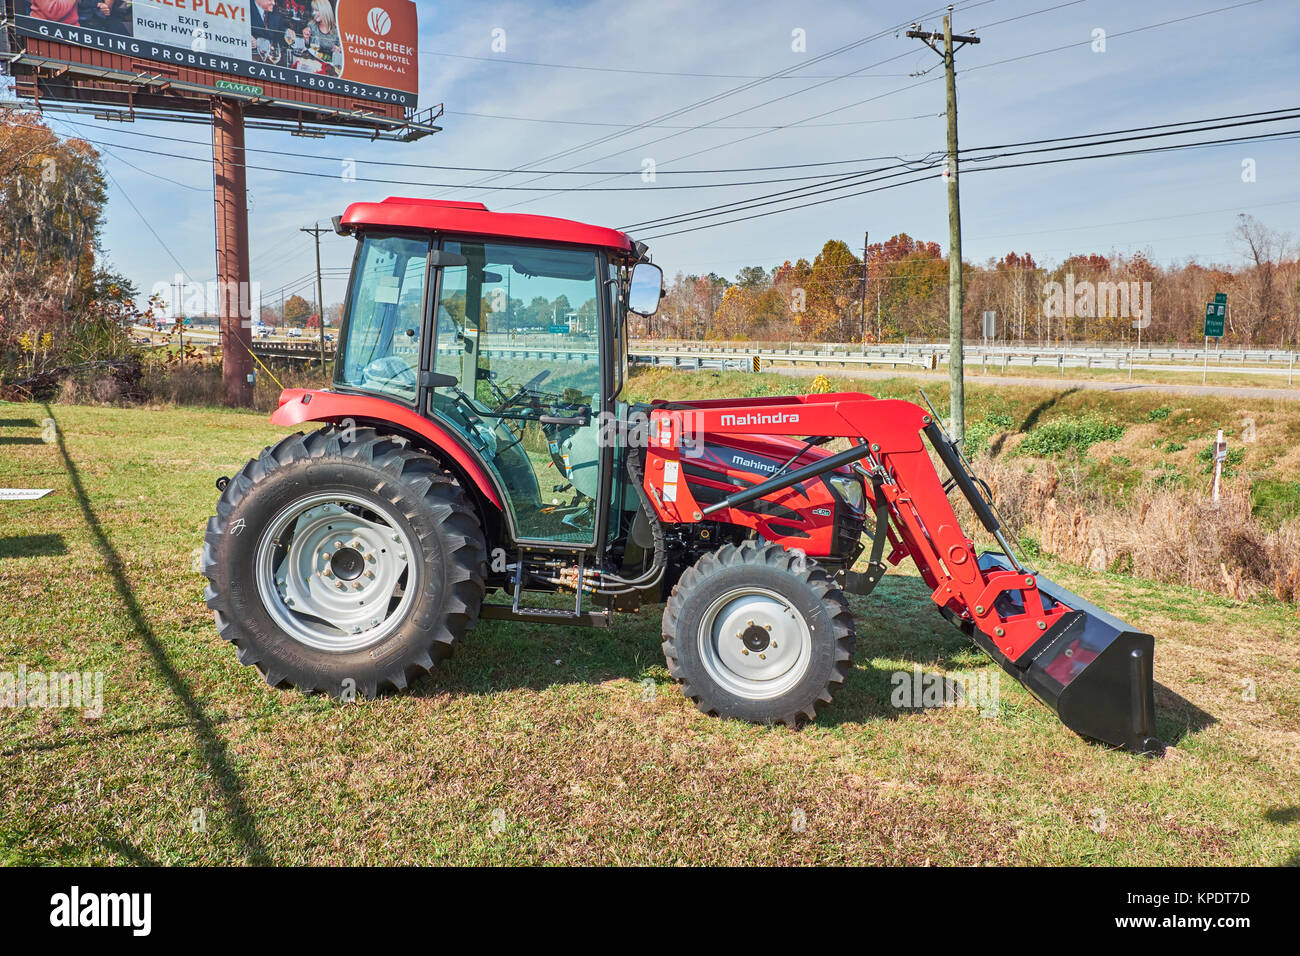 Brand new Mahindra 2565 CL shuttle cab red tractor sitting in front of the dealership with optional front loader. Stock Photo